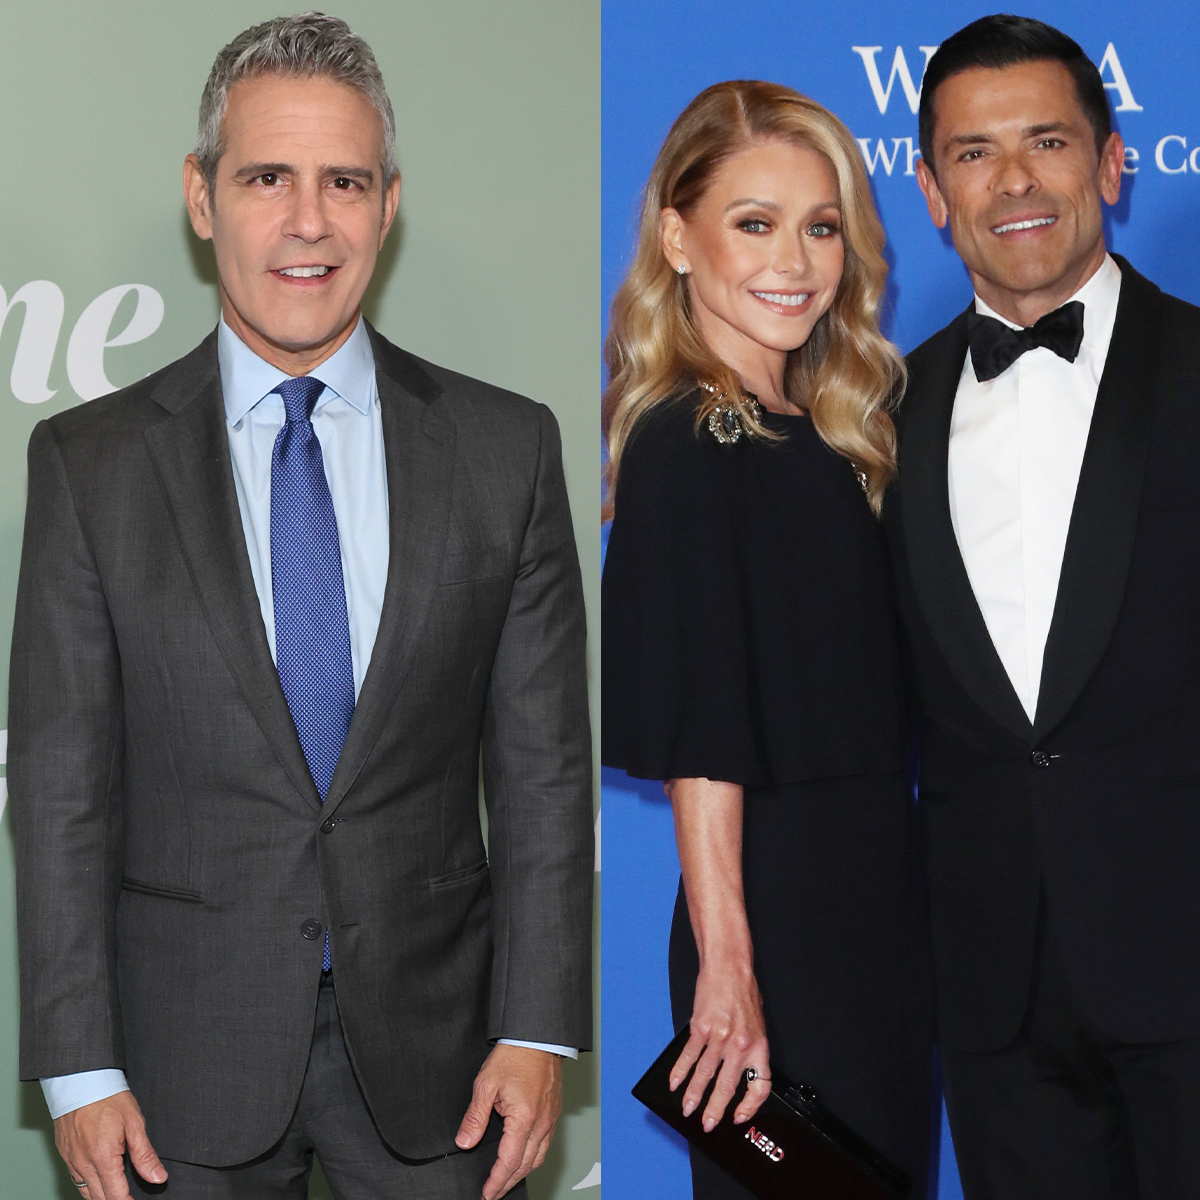 Andy Cohen Says Kelly Ripa's Son Michael Works on 'Real Housewives